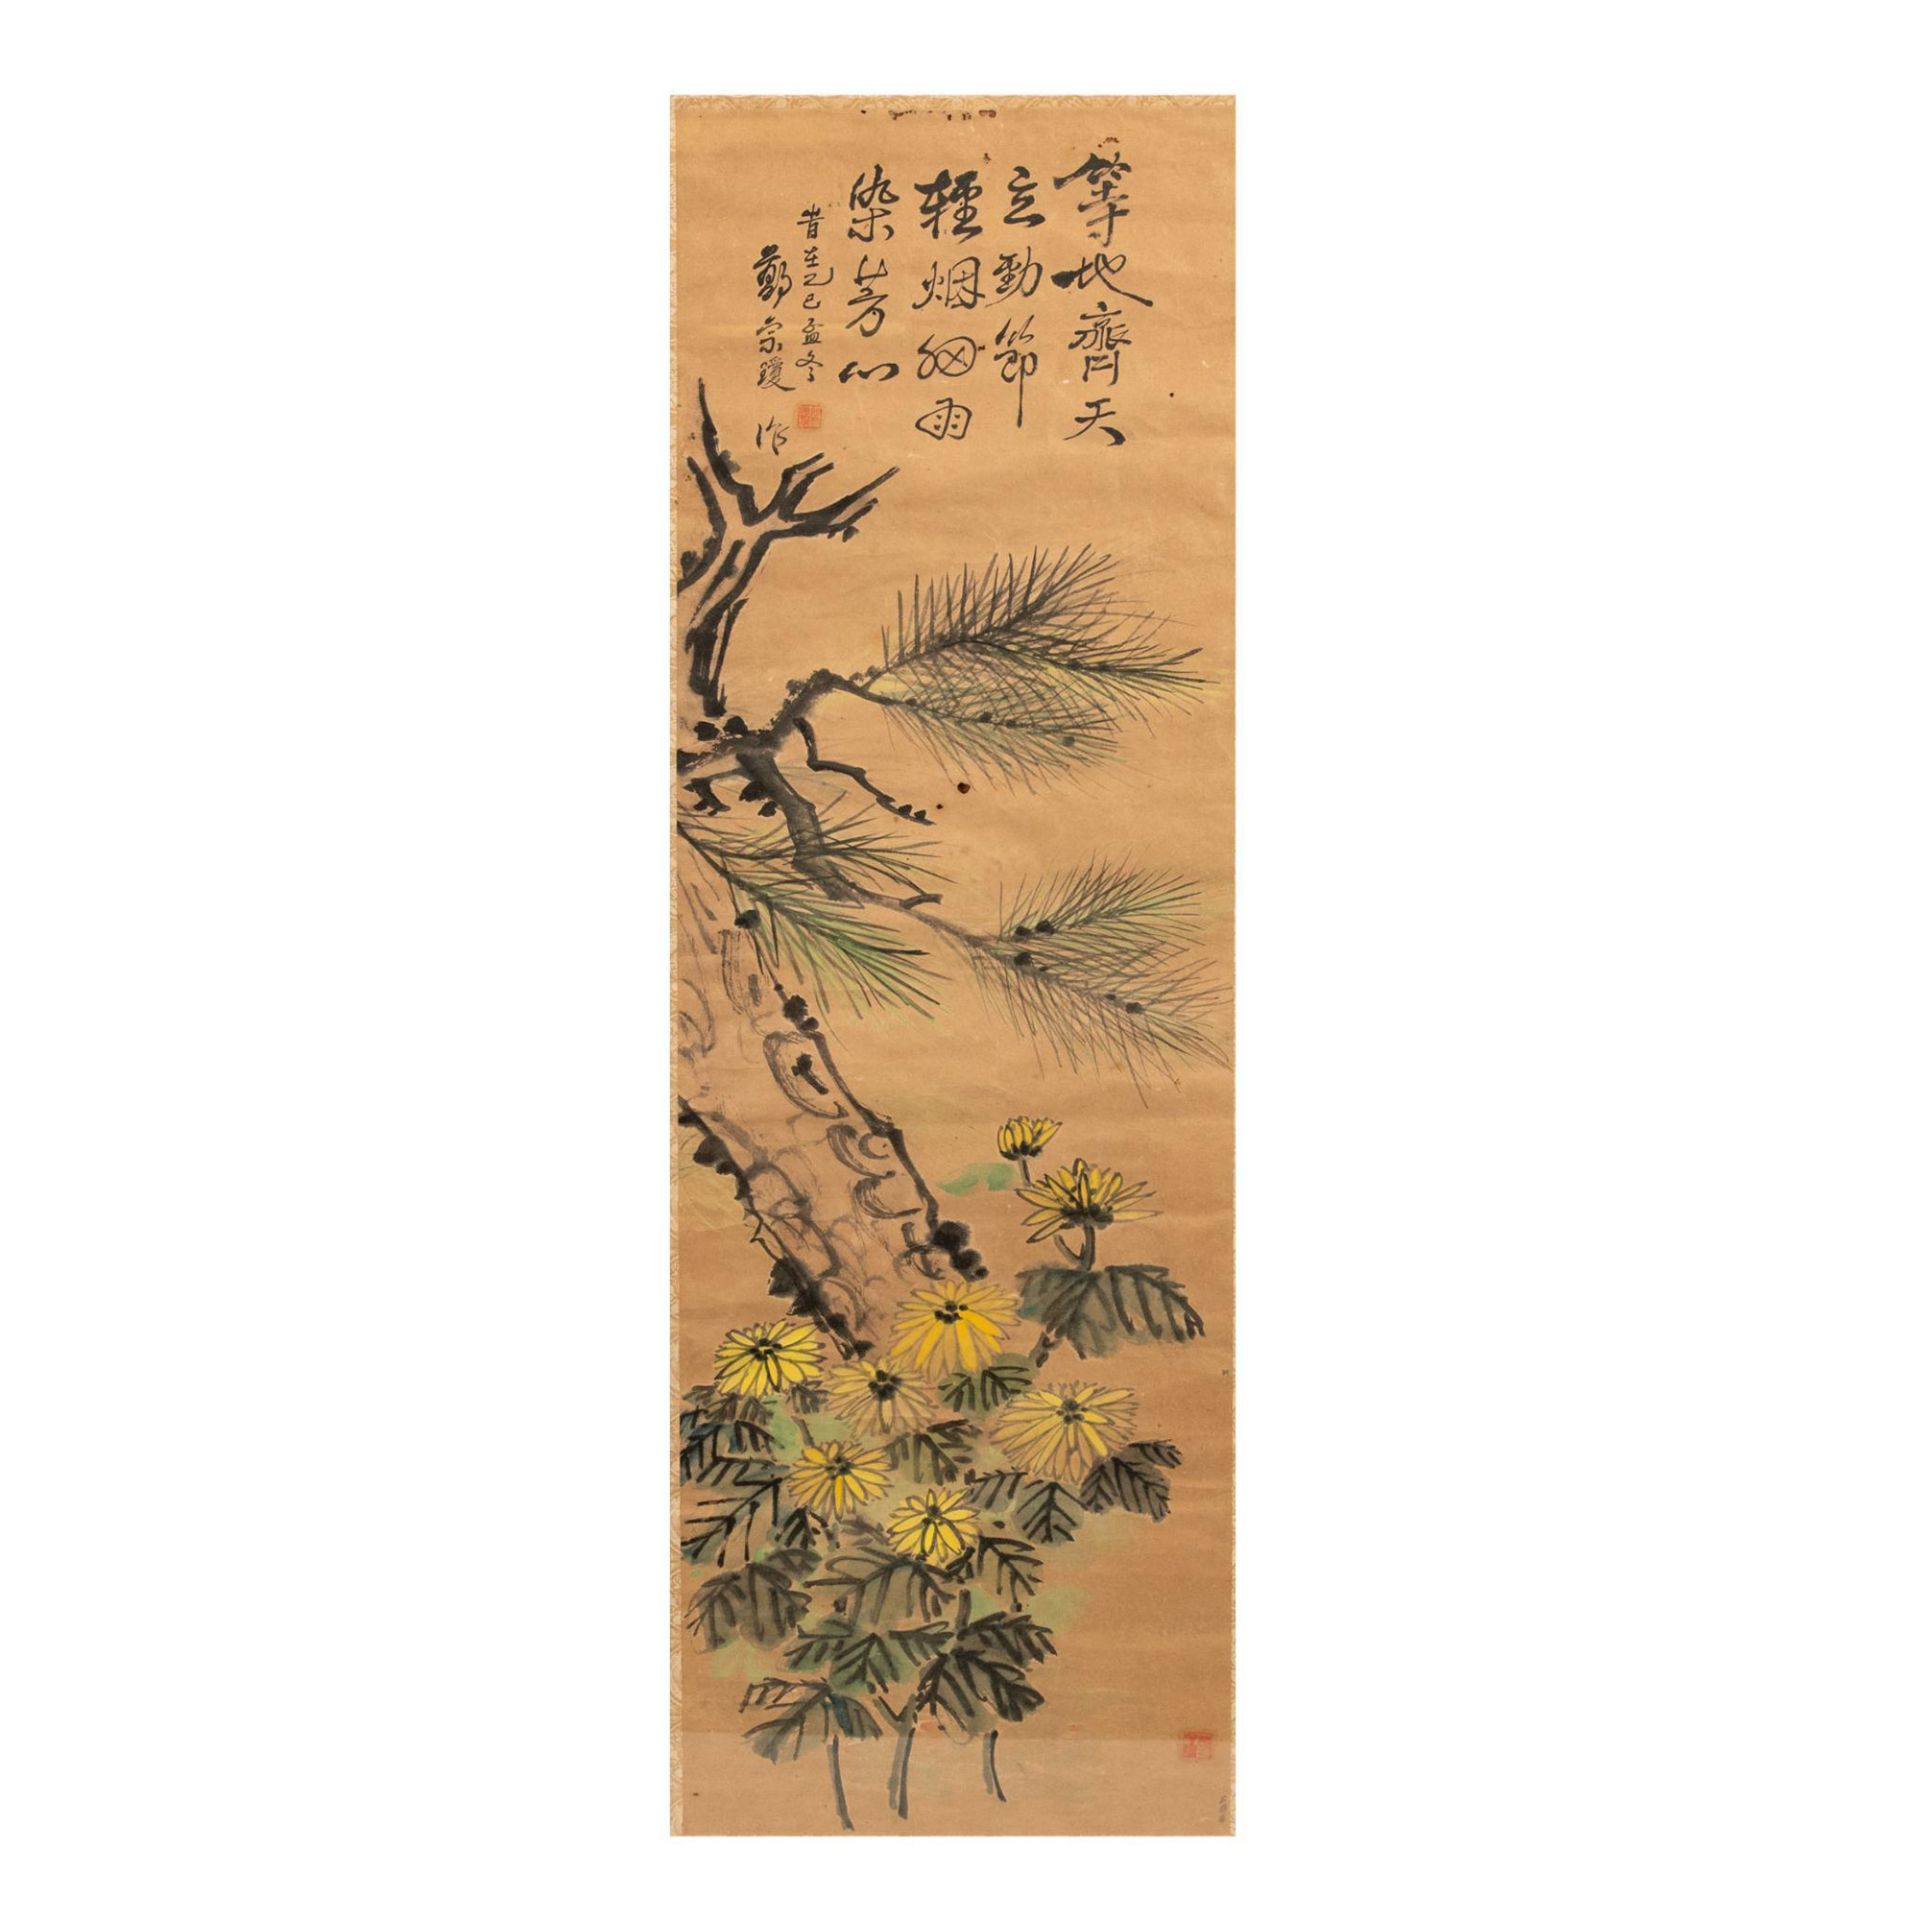 Chinese Ink and Color Calligraphic Artwork on Paper, Signed - Image 2 of 6